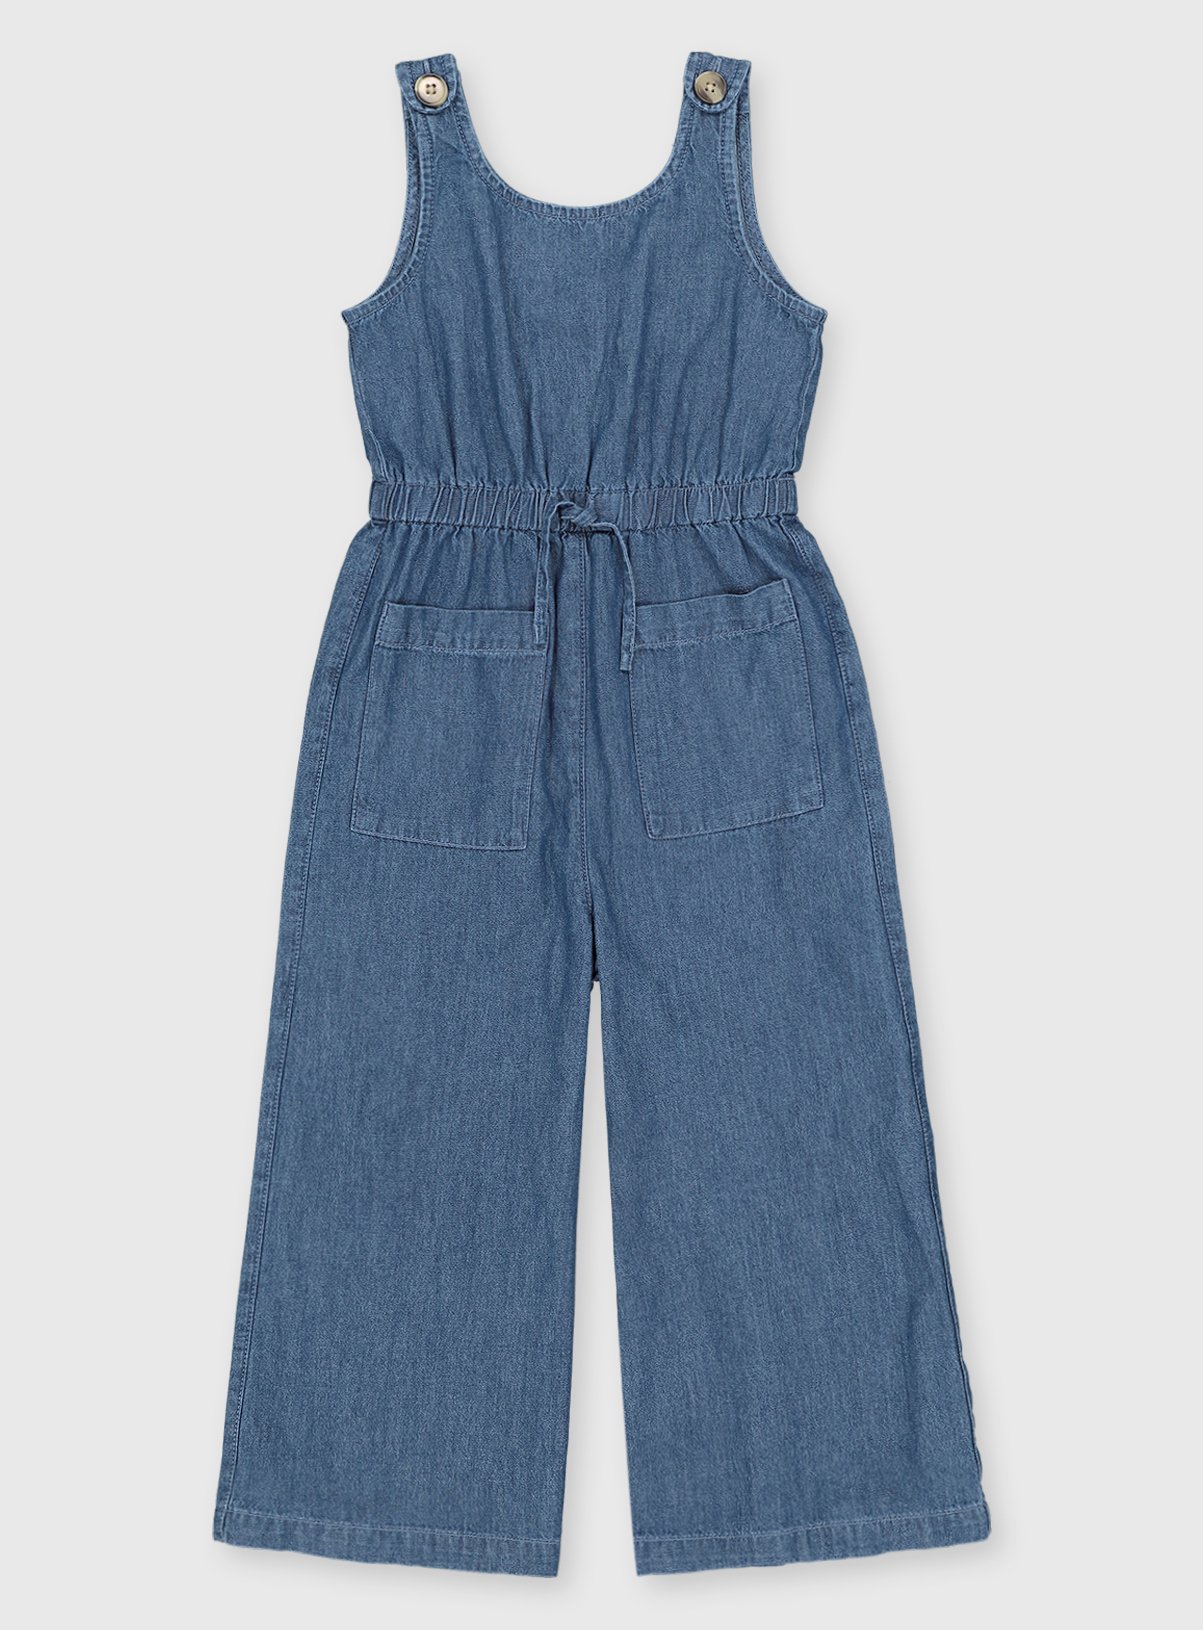 Clothing Sets Teenage Girls Jumpsuit Blue Jeans Overalls For Kids Clothes  Set Pants Age 12 13 14 Years Childrens Ripped Outfits From 29,43 € | DHgate